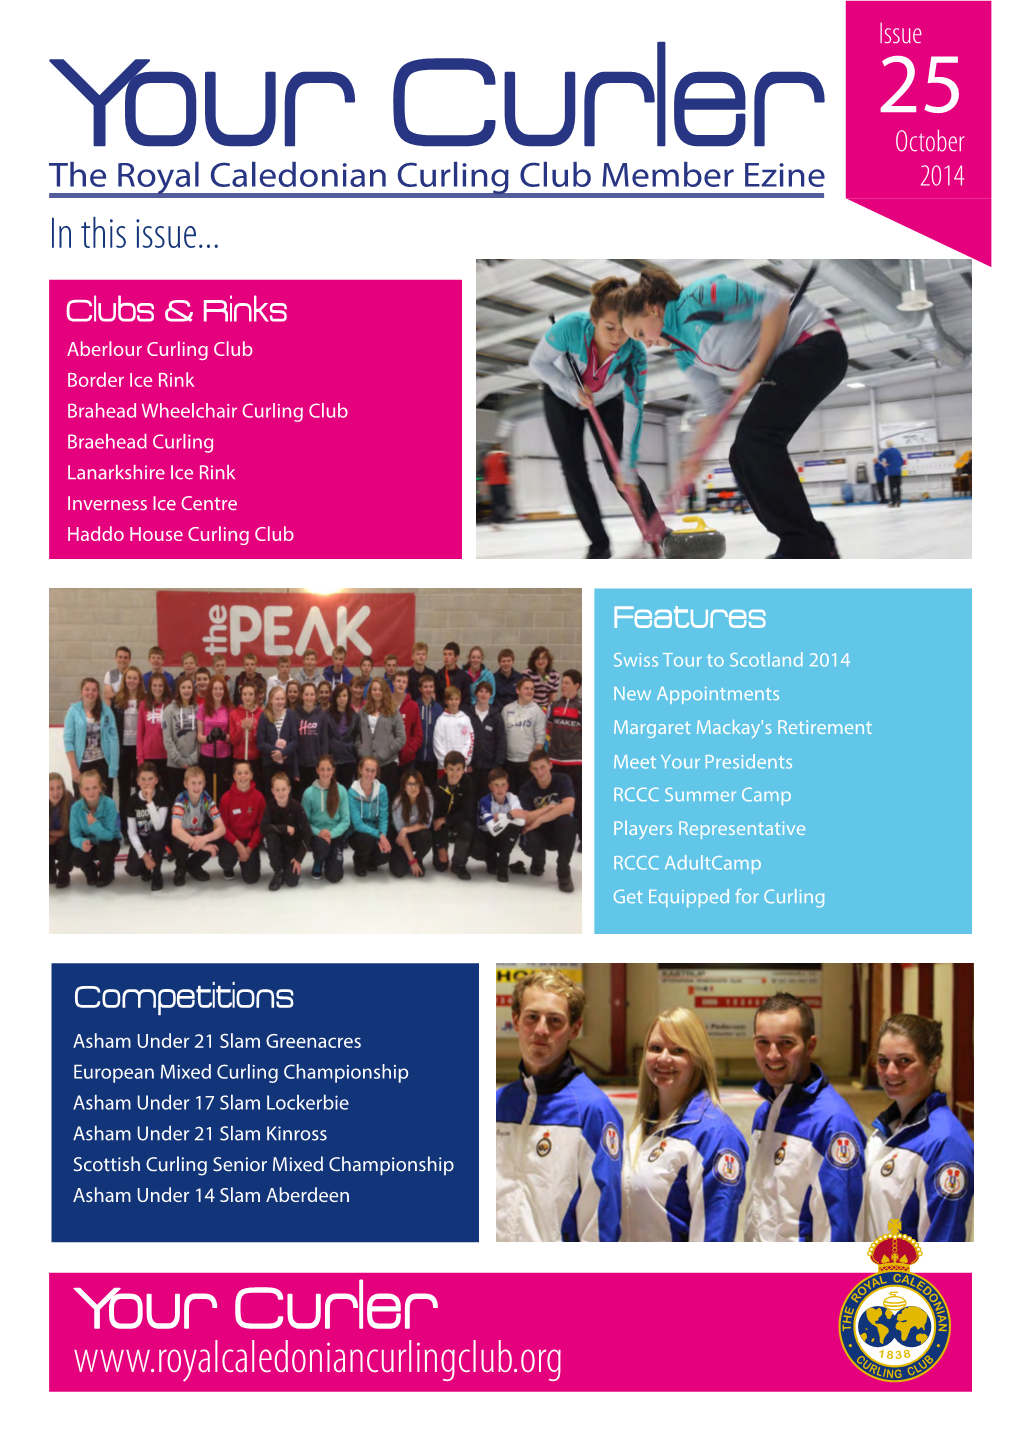 Your Curler October the Royal Caledonian Curling Club Member Ezine 2014 in This Issue